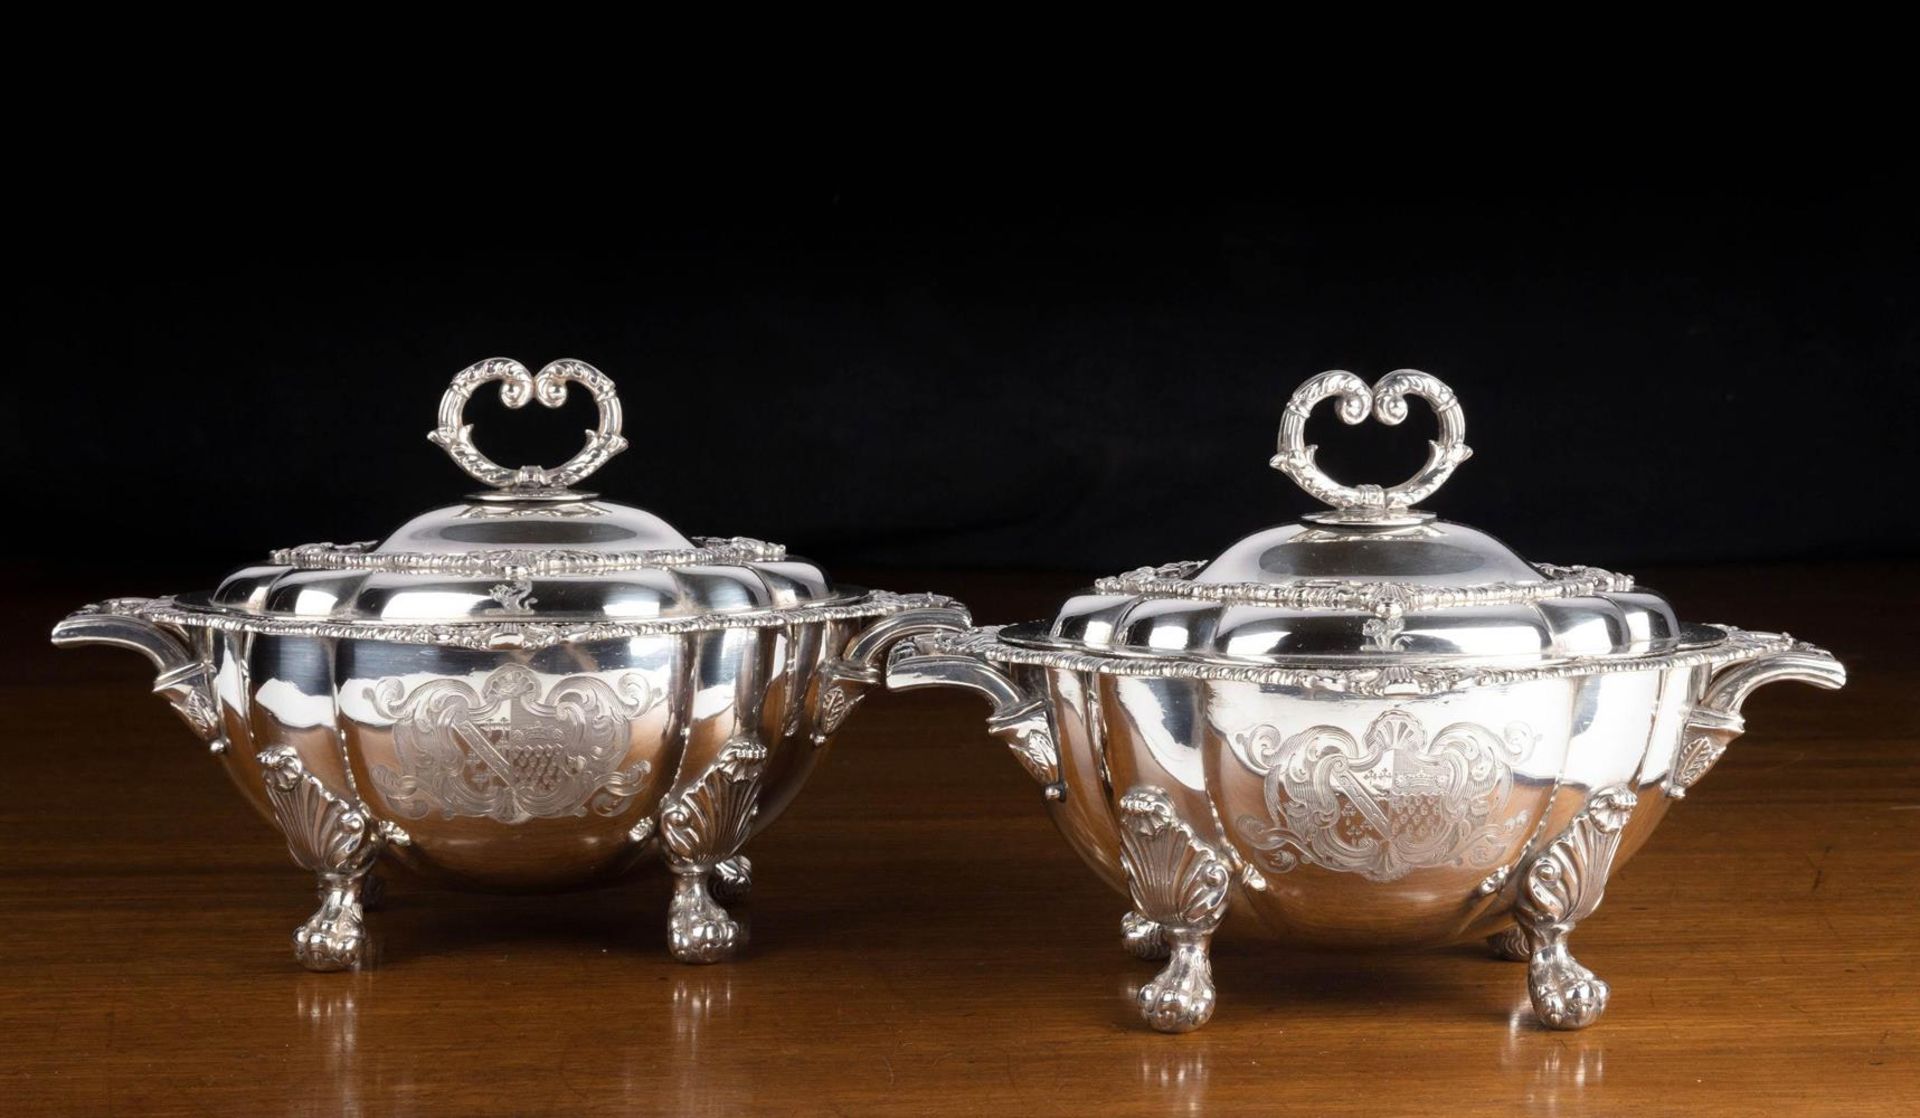 A PAIR OF GEORGE IV SILVER SAUCE TUREENS AND COVERS, ROBERT HENNELL, LONDON 1817 - Bild 5 aus 8